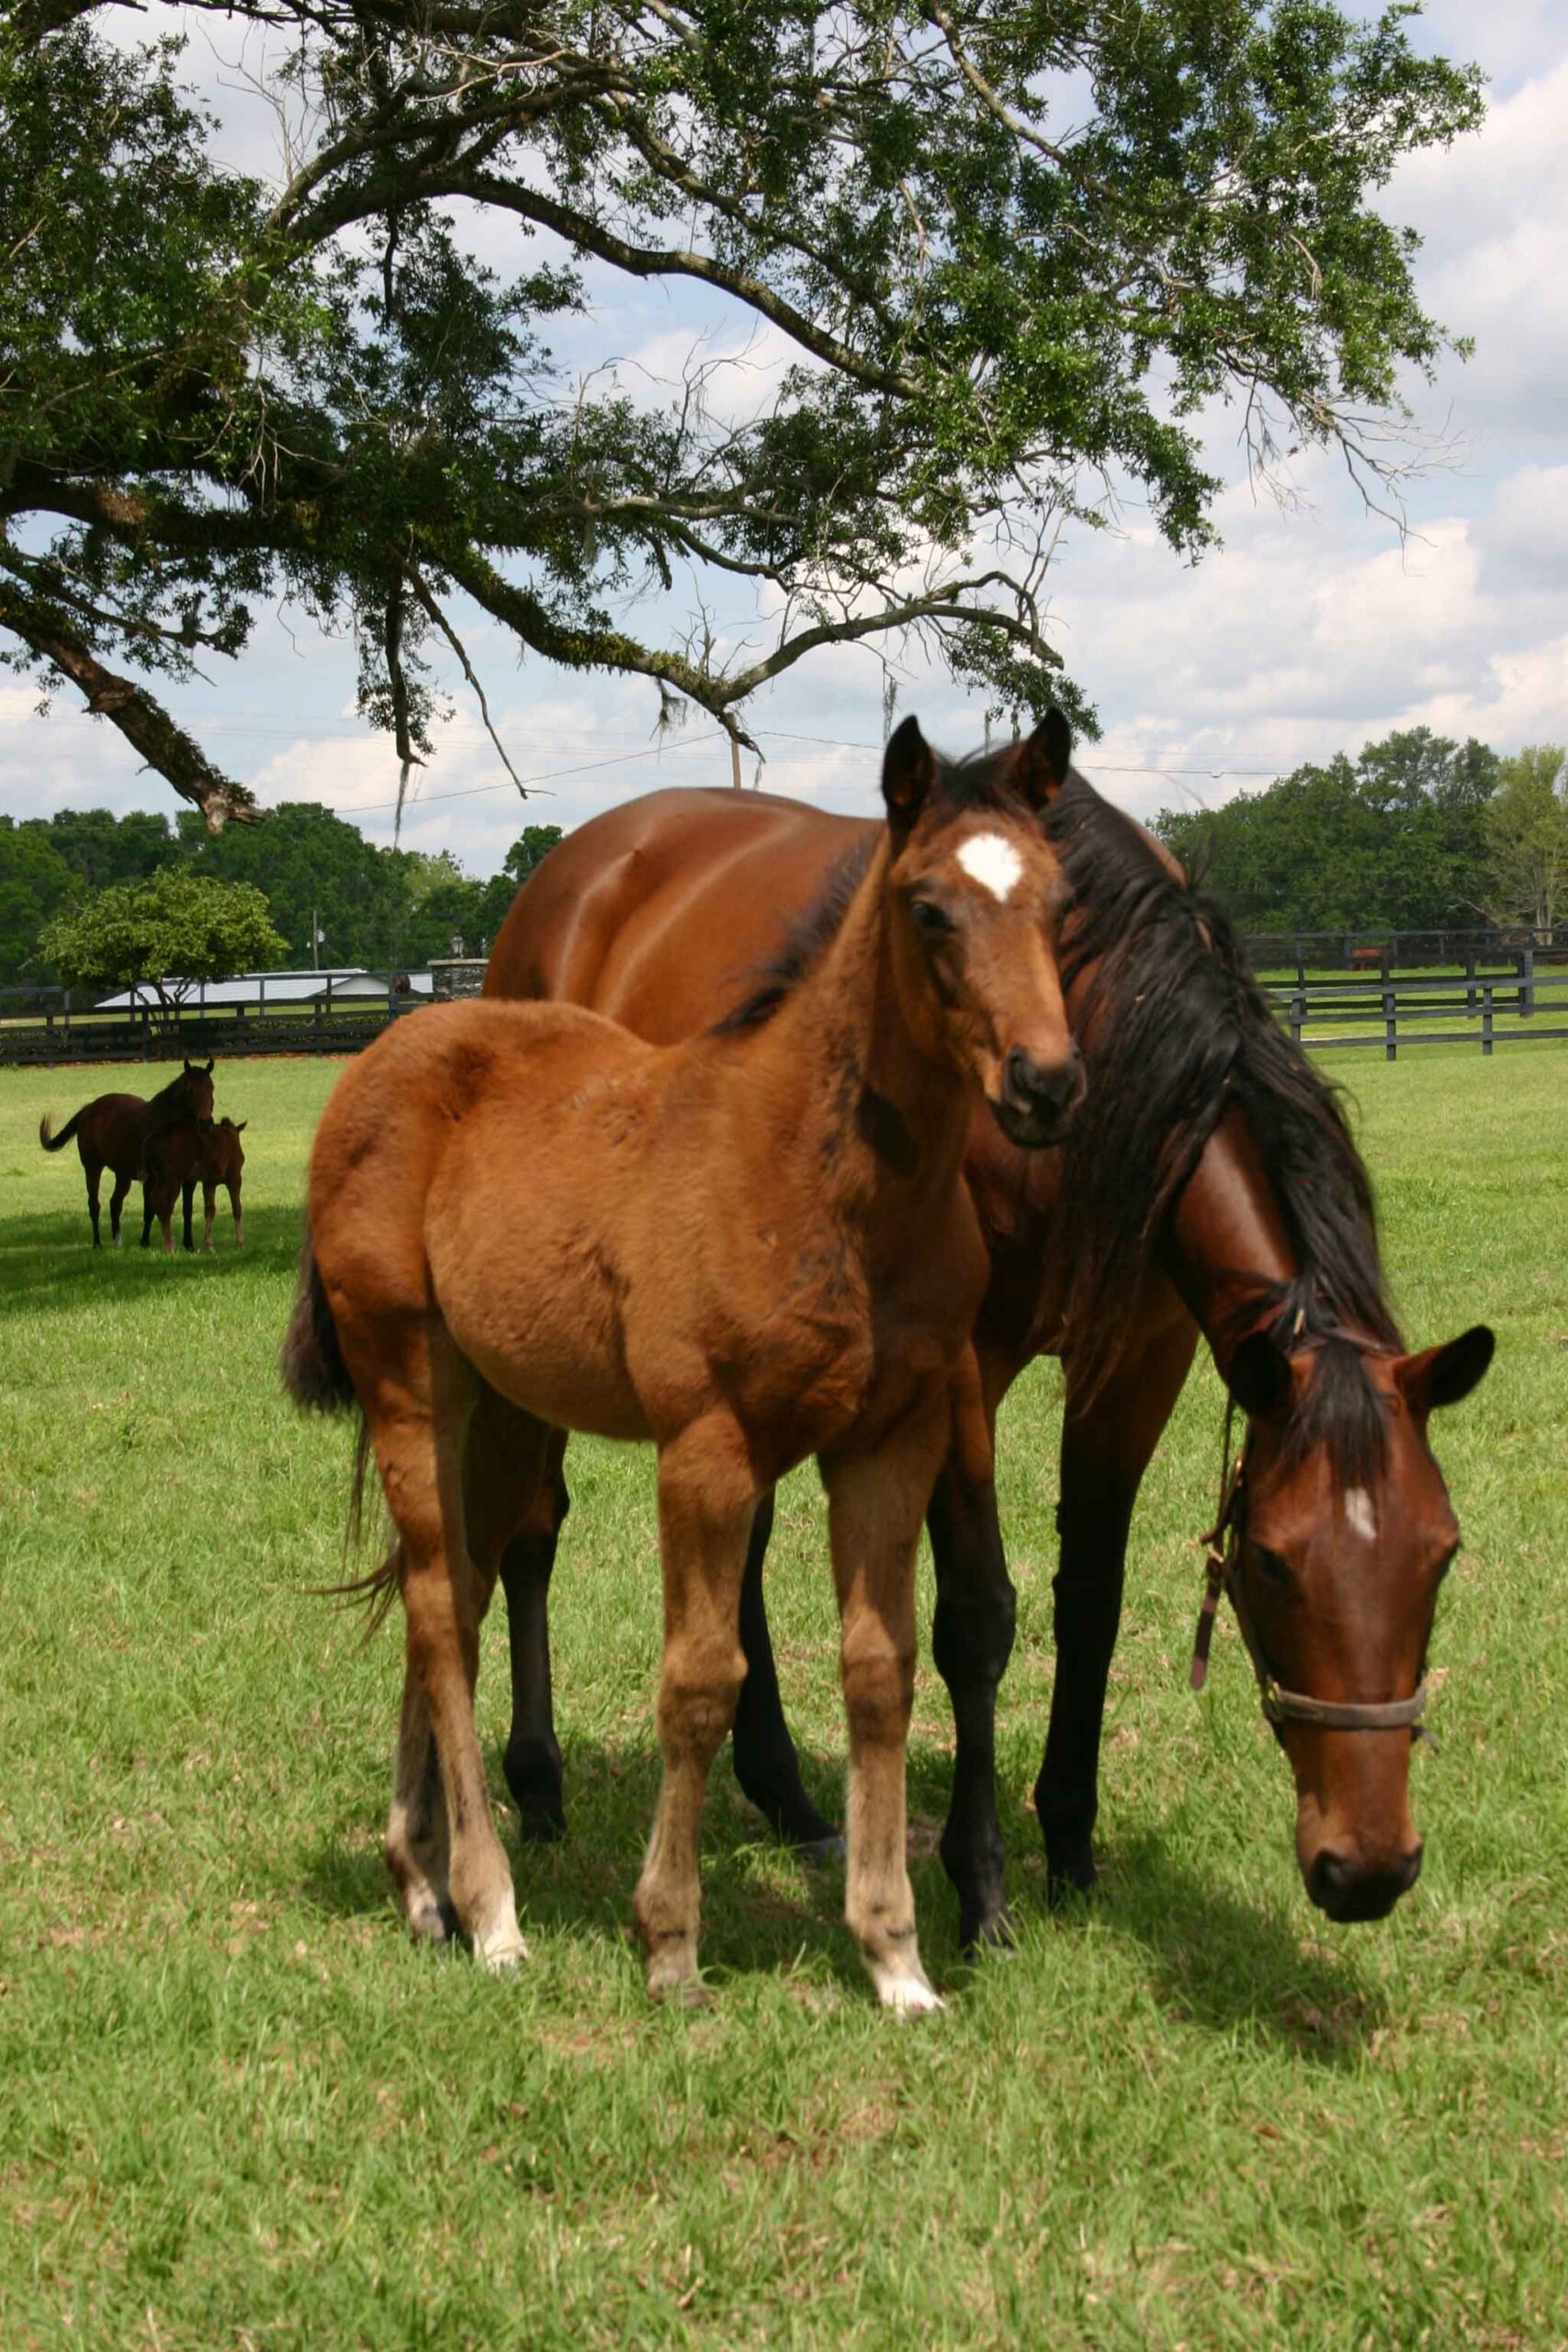 A mare and foal in a good pasture.